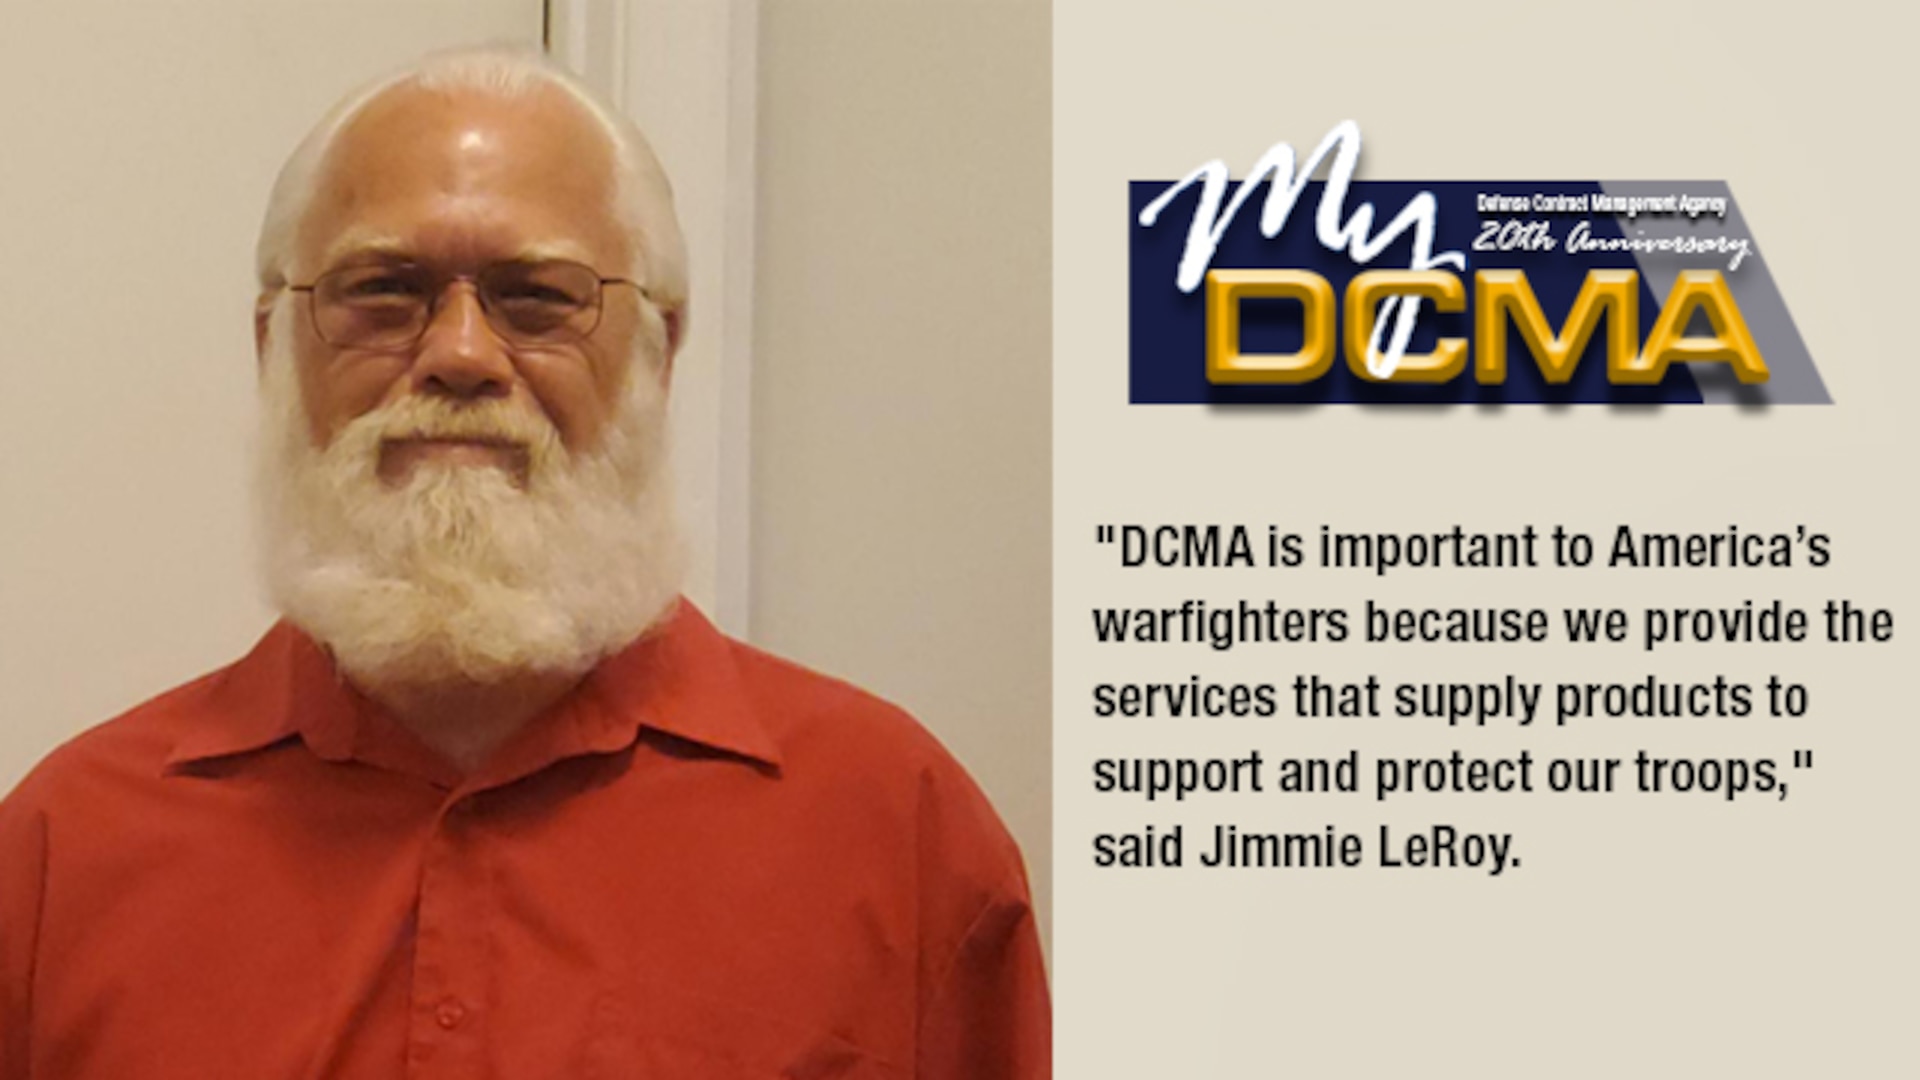 Man wearing a red shirt smiles at the camera. The My DCMA 20th anniversary logo is located in the right upper corner.